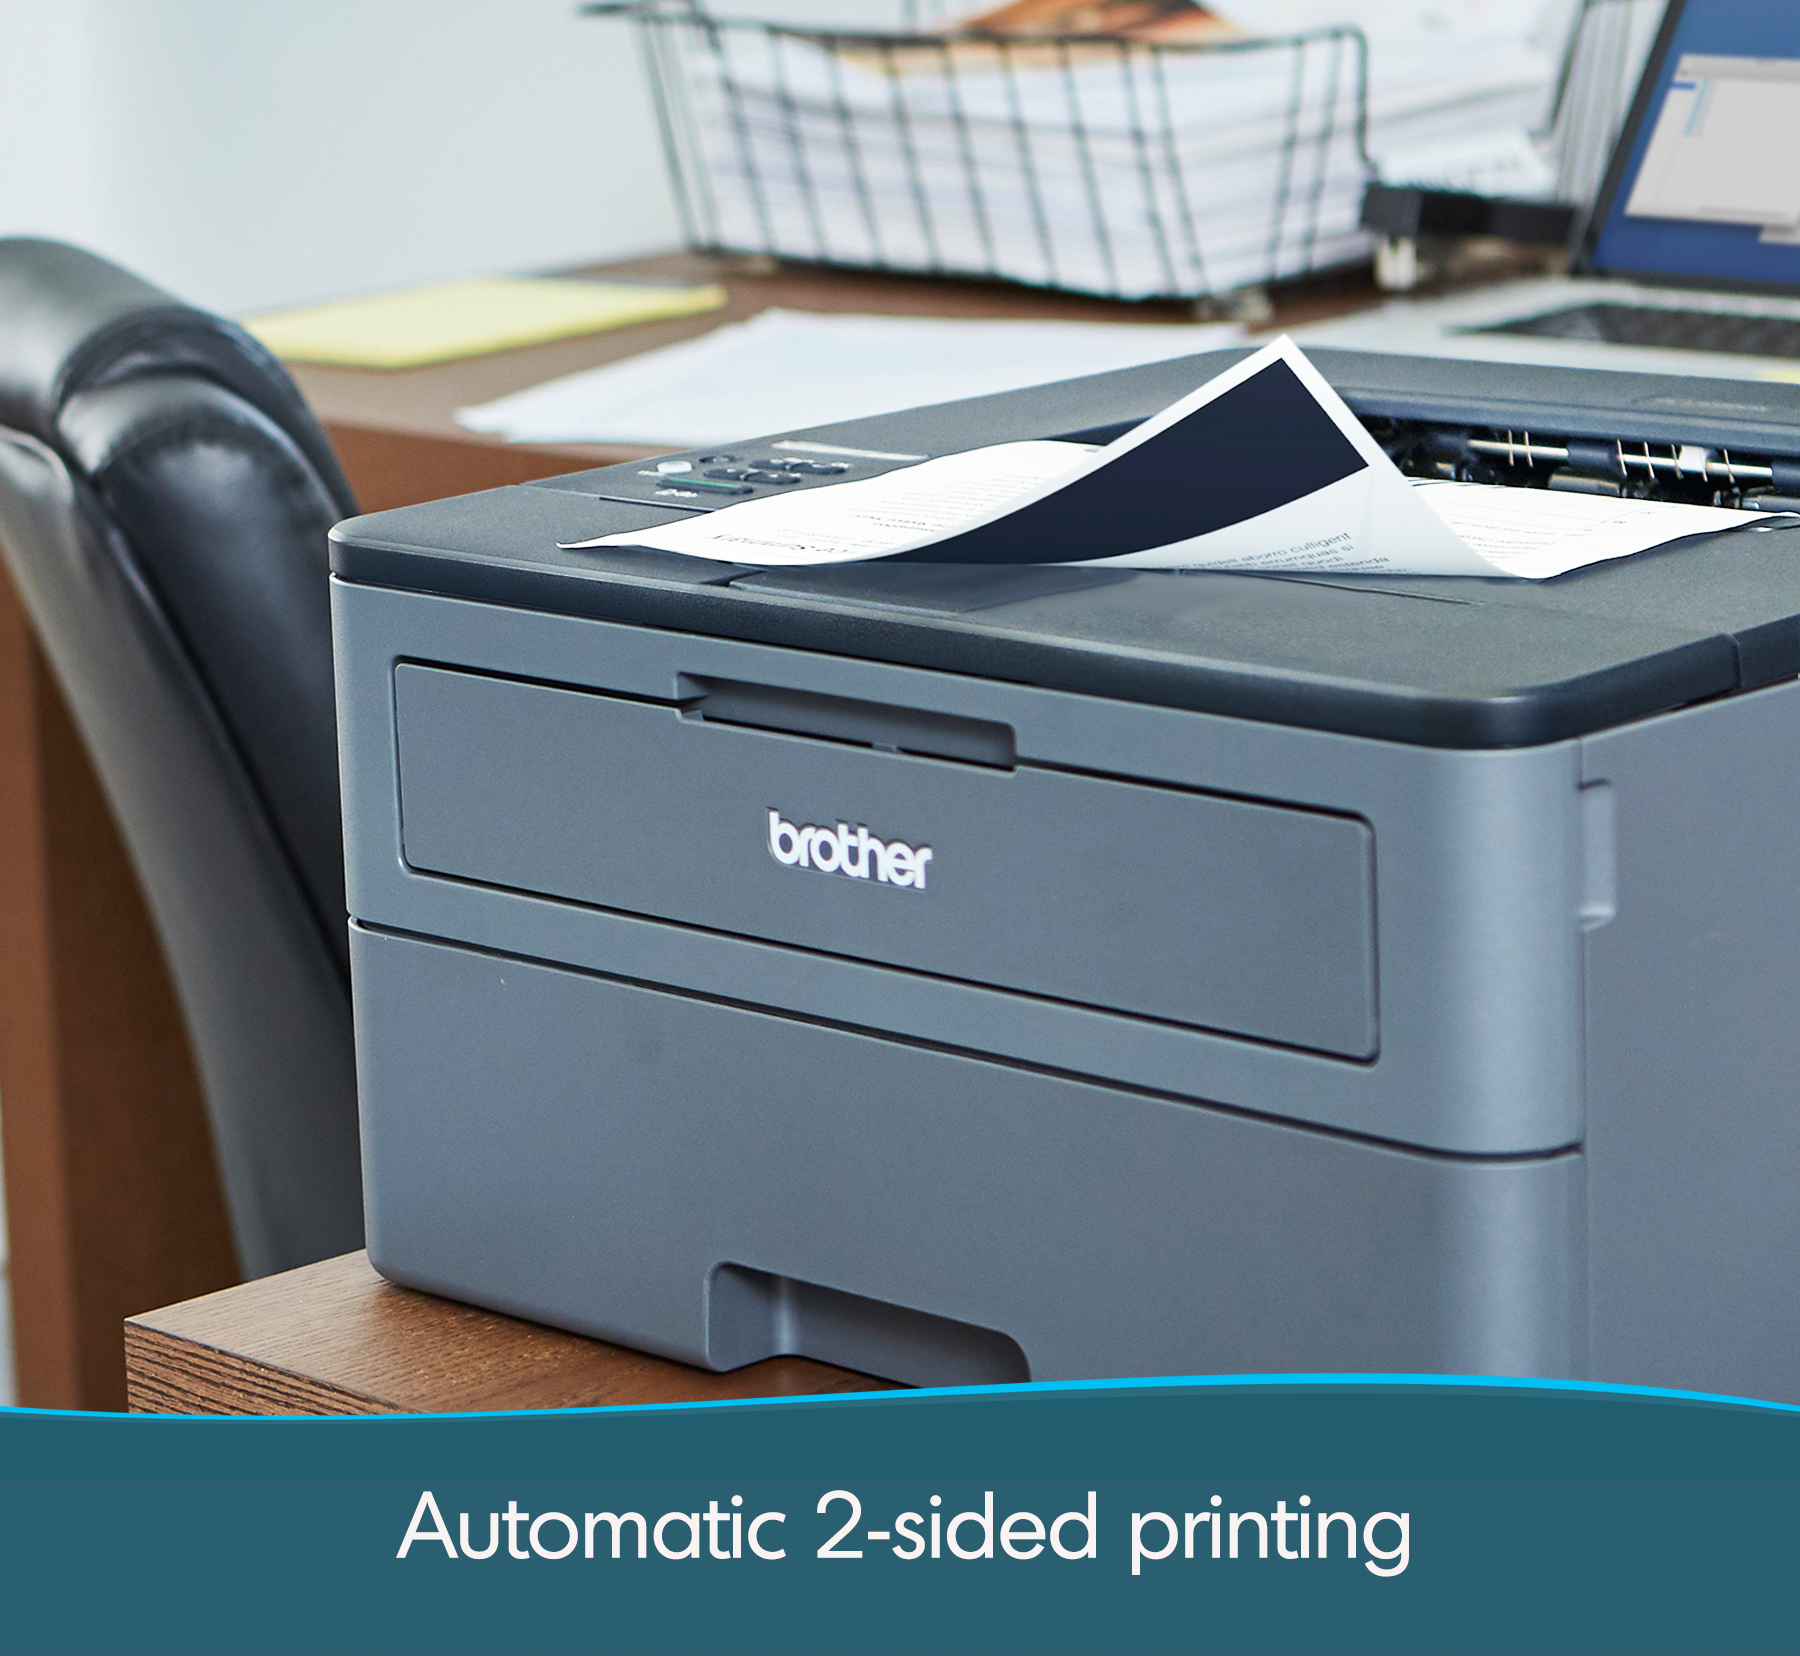 Brother HLL2370DW XL Extended Print Monochrome Laser Printer, up to 2 Years of Toner In-Box - image 5 of 9